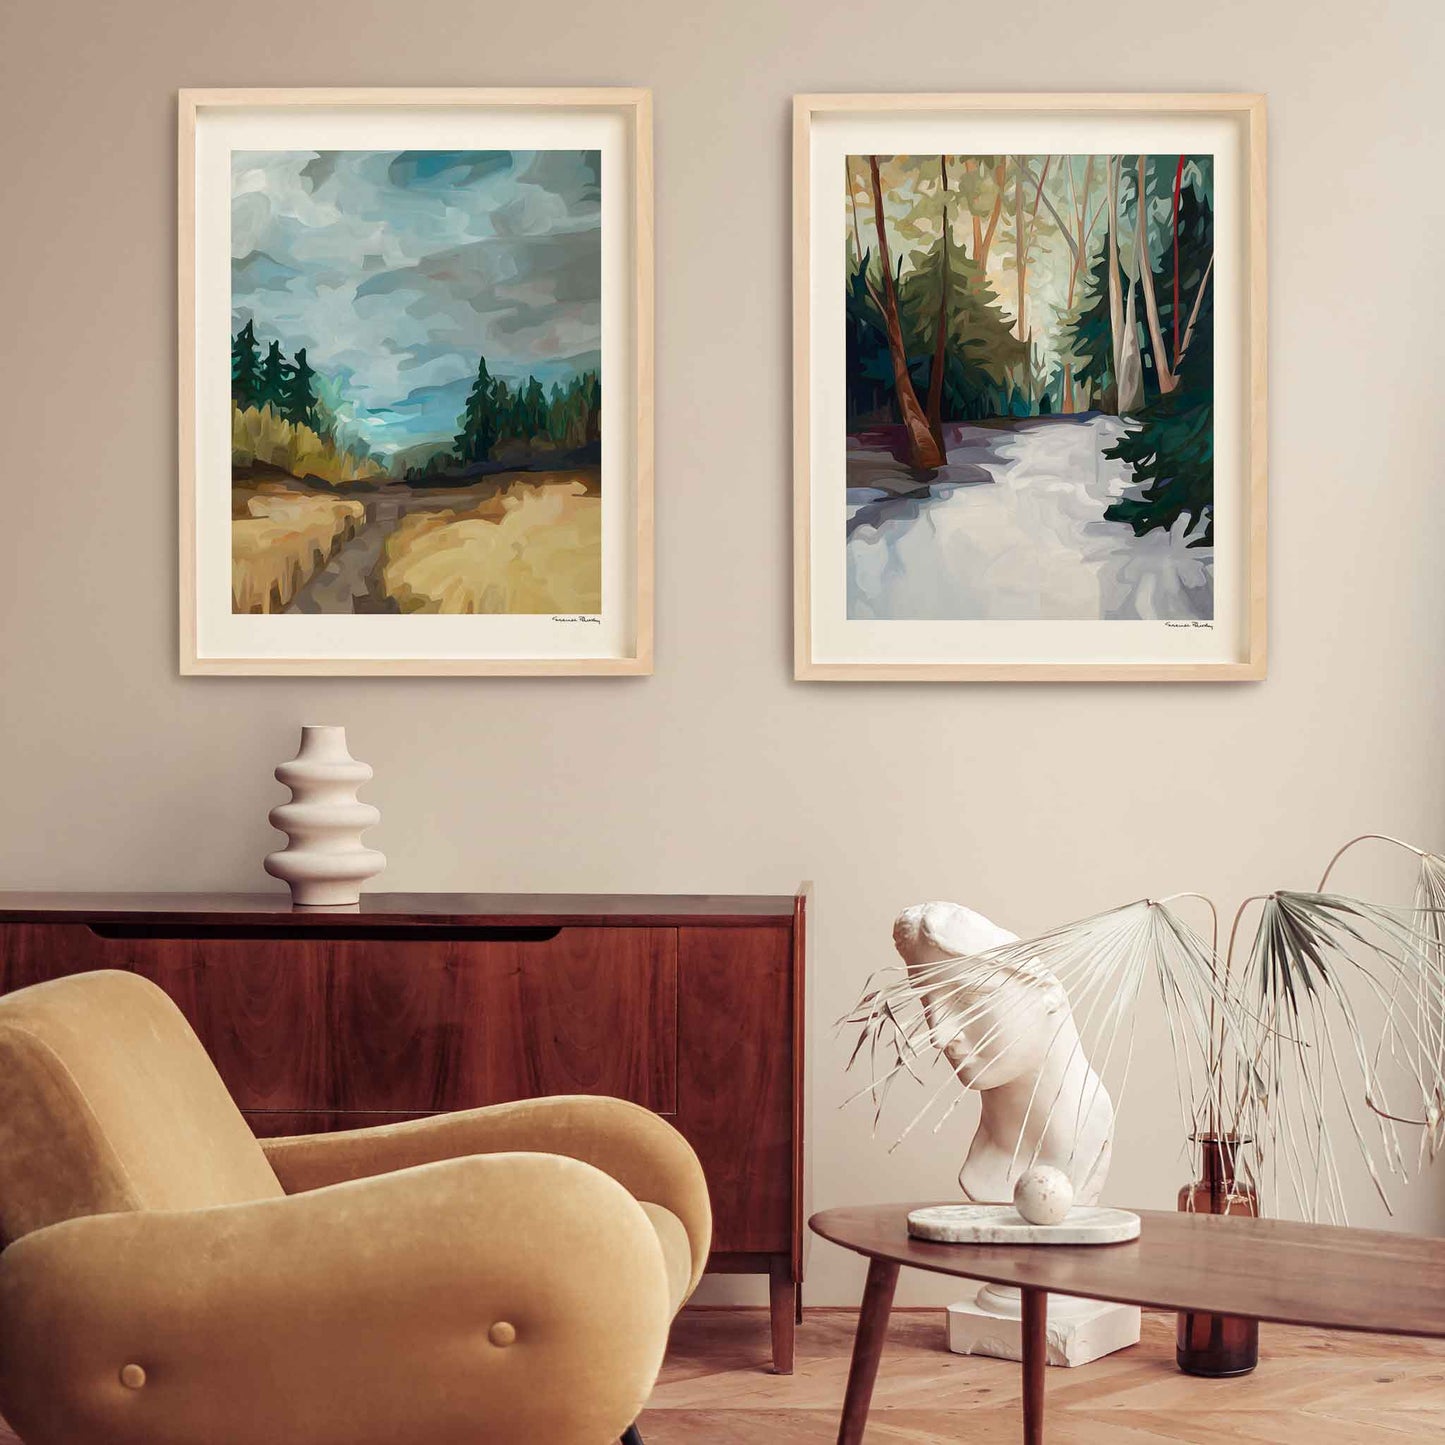 Two abstract landscape art prints from the 'Down to Earth' collection of painting prints by Canadian artist Susannah Bleasby